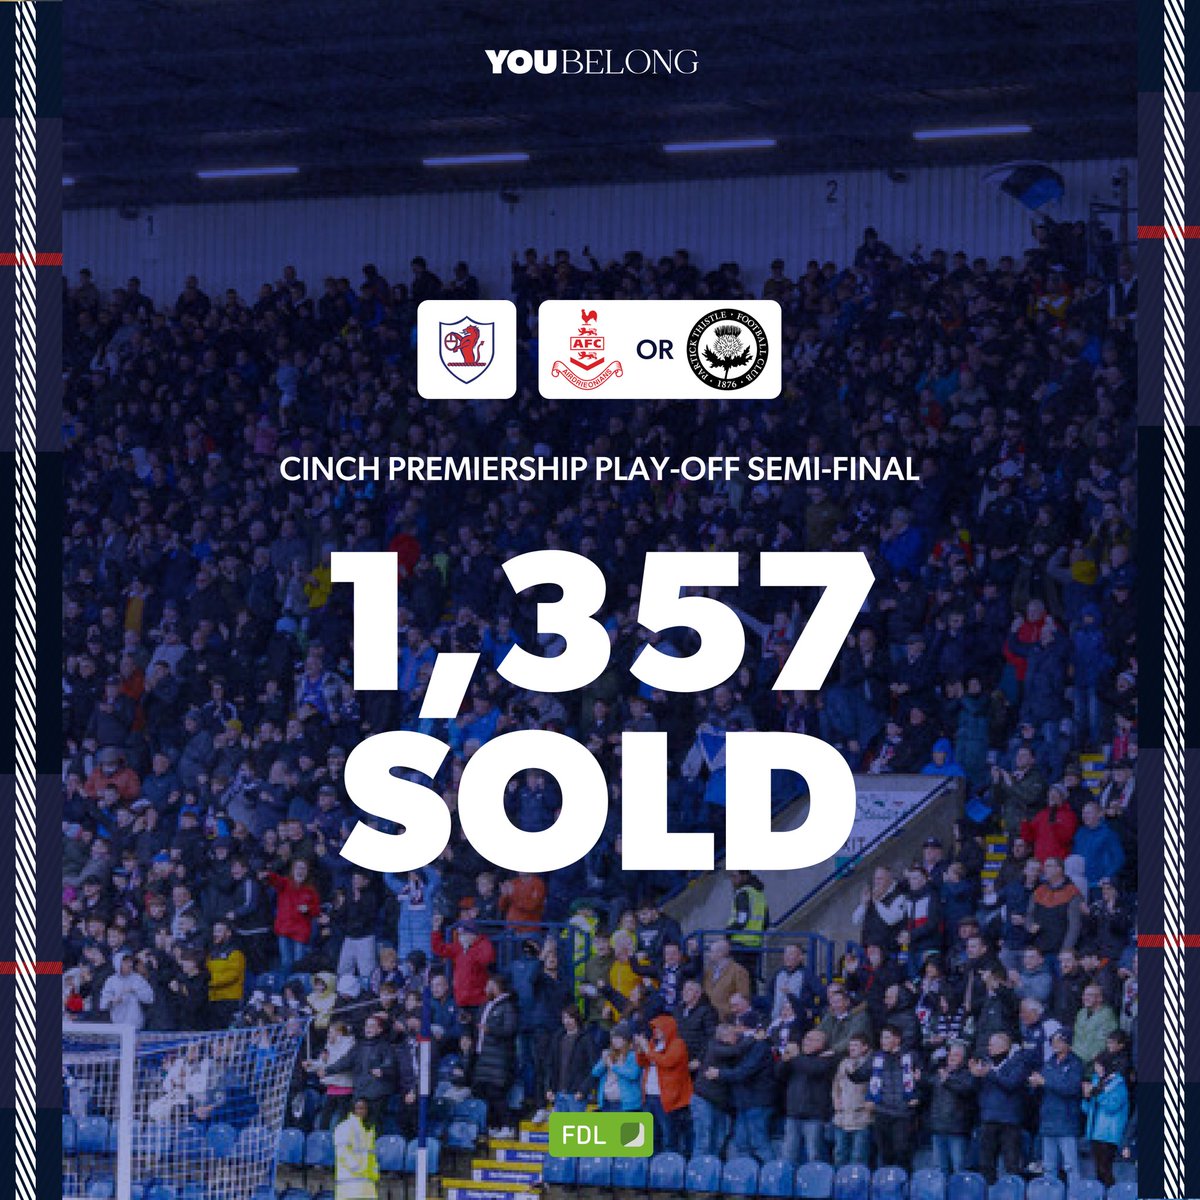 🚨 Play-Off General Sale Open

After going on sale yesterday to season ticket holders, we’ve already sold over 1,300 tickets for our upcoming Play-Off Semi-Final.

All supporters can now purchase their ticket:

🎟️ bit.ly/PlayOff-Semi

#YouBelong